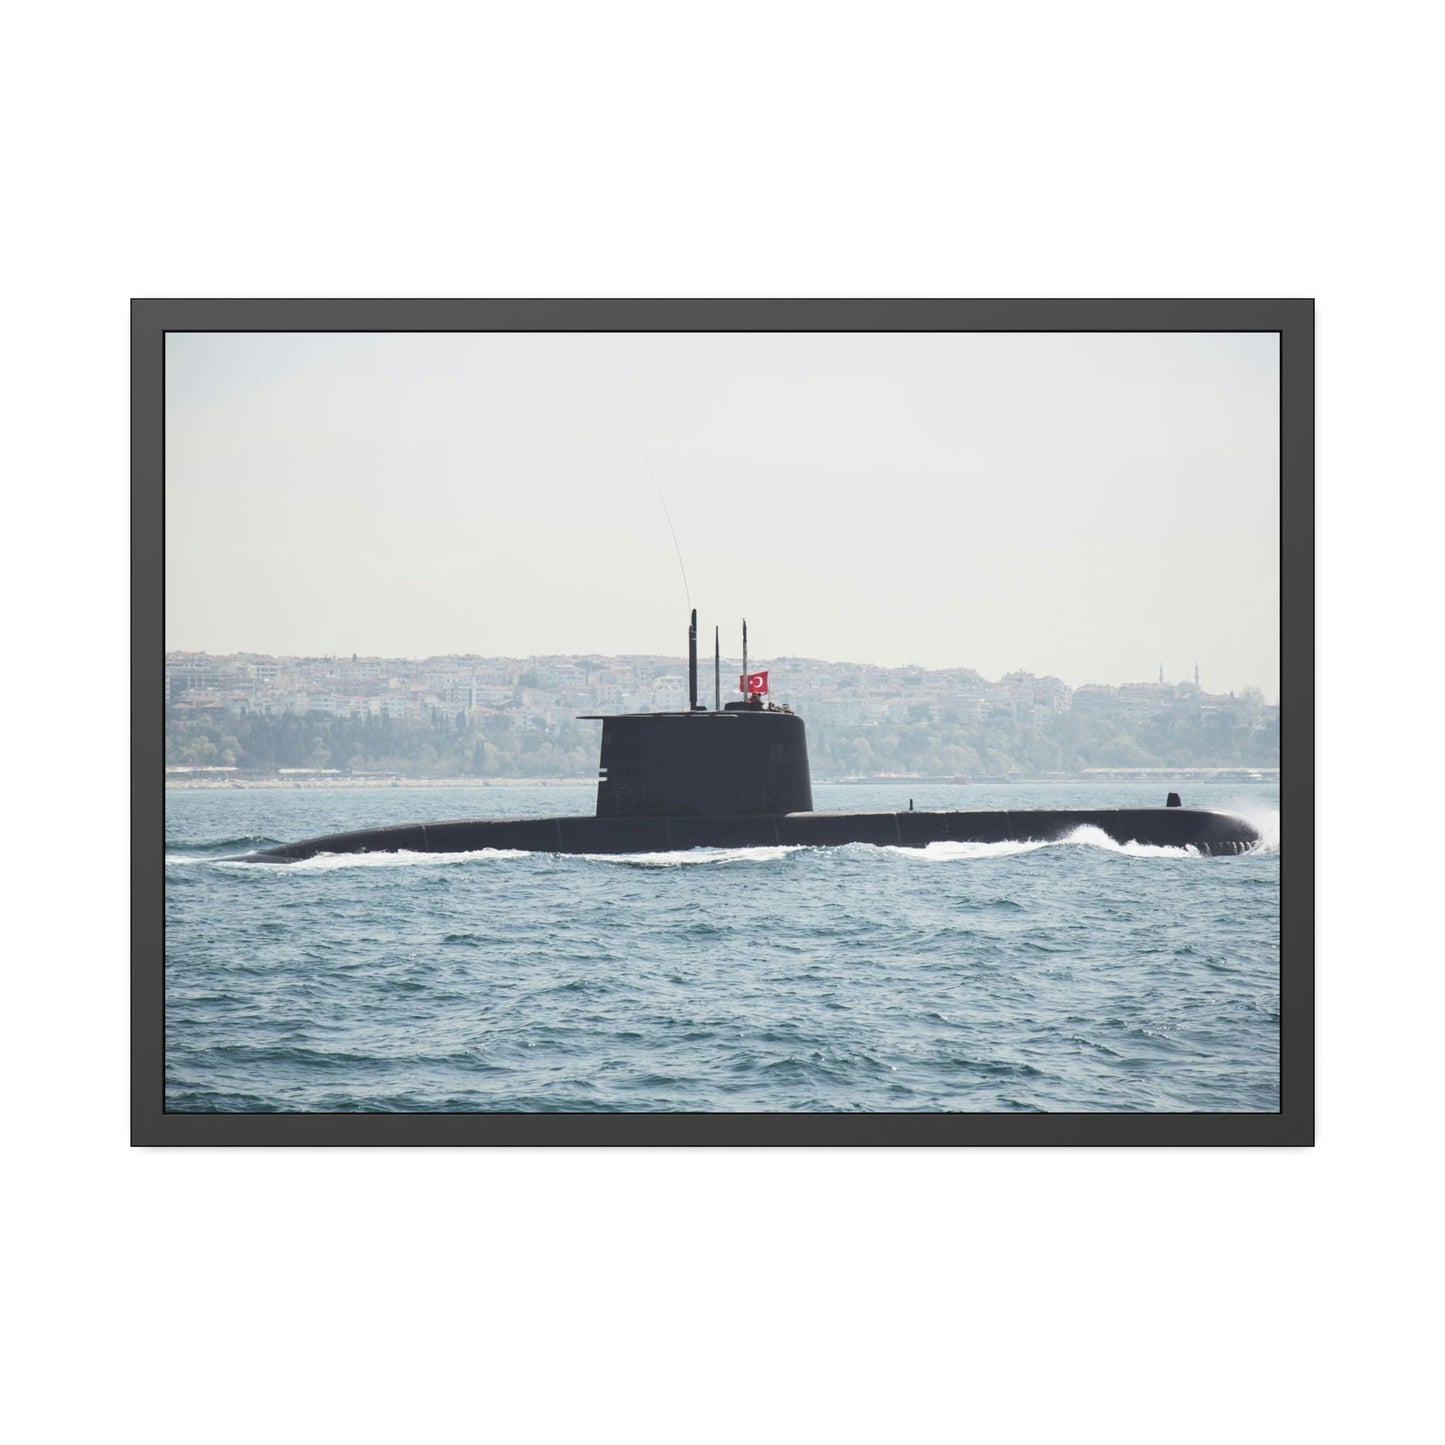 Submarines and the Blue Horizon: A Vision of the Ocean's Majesty